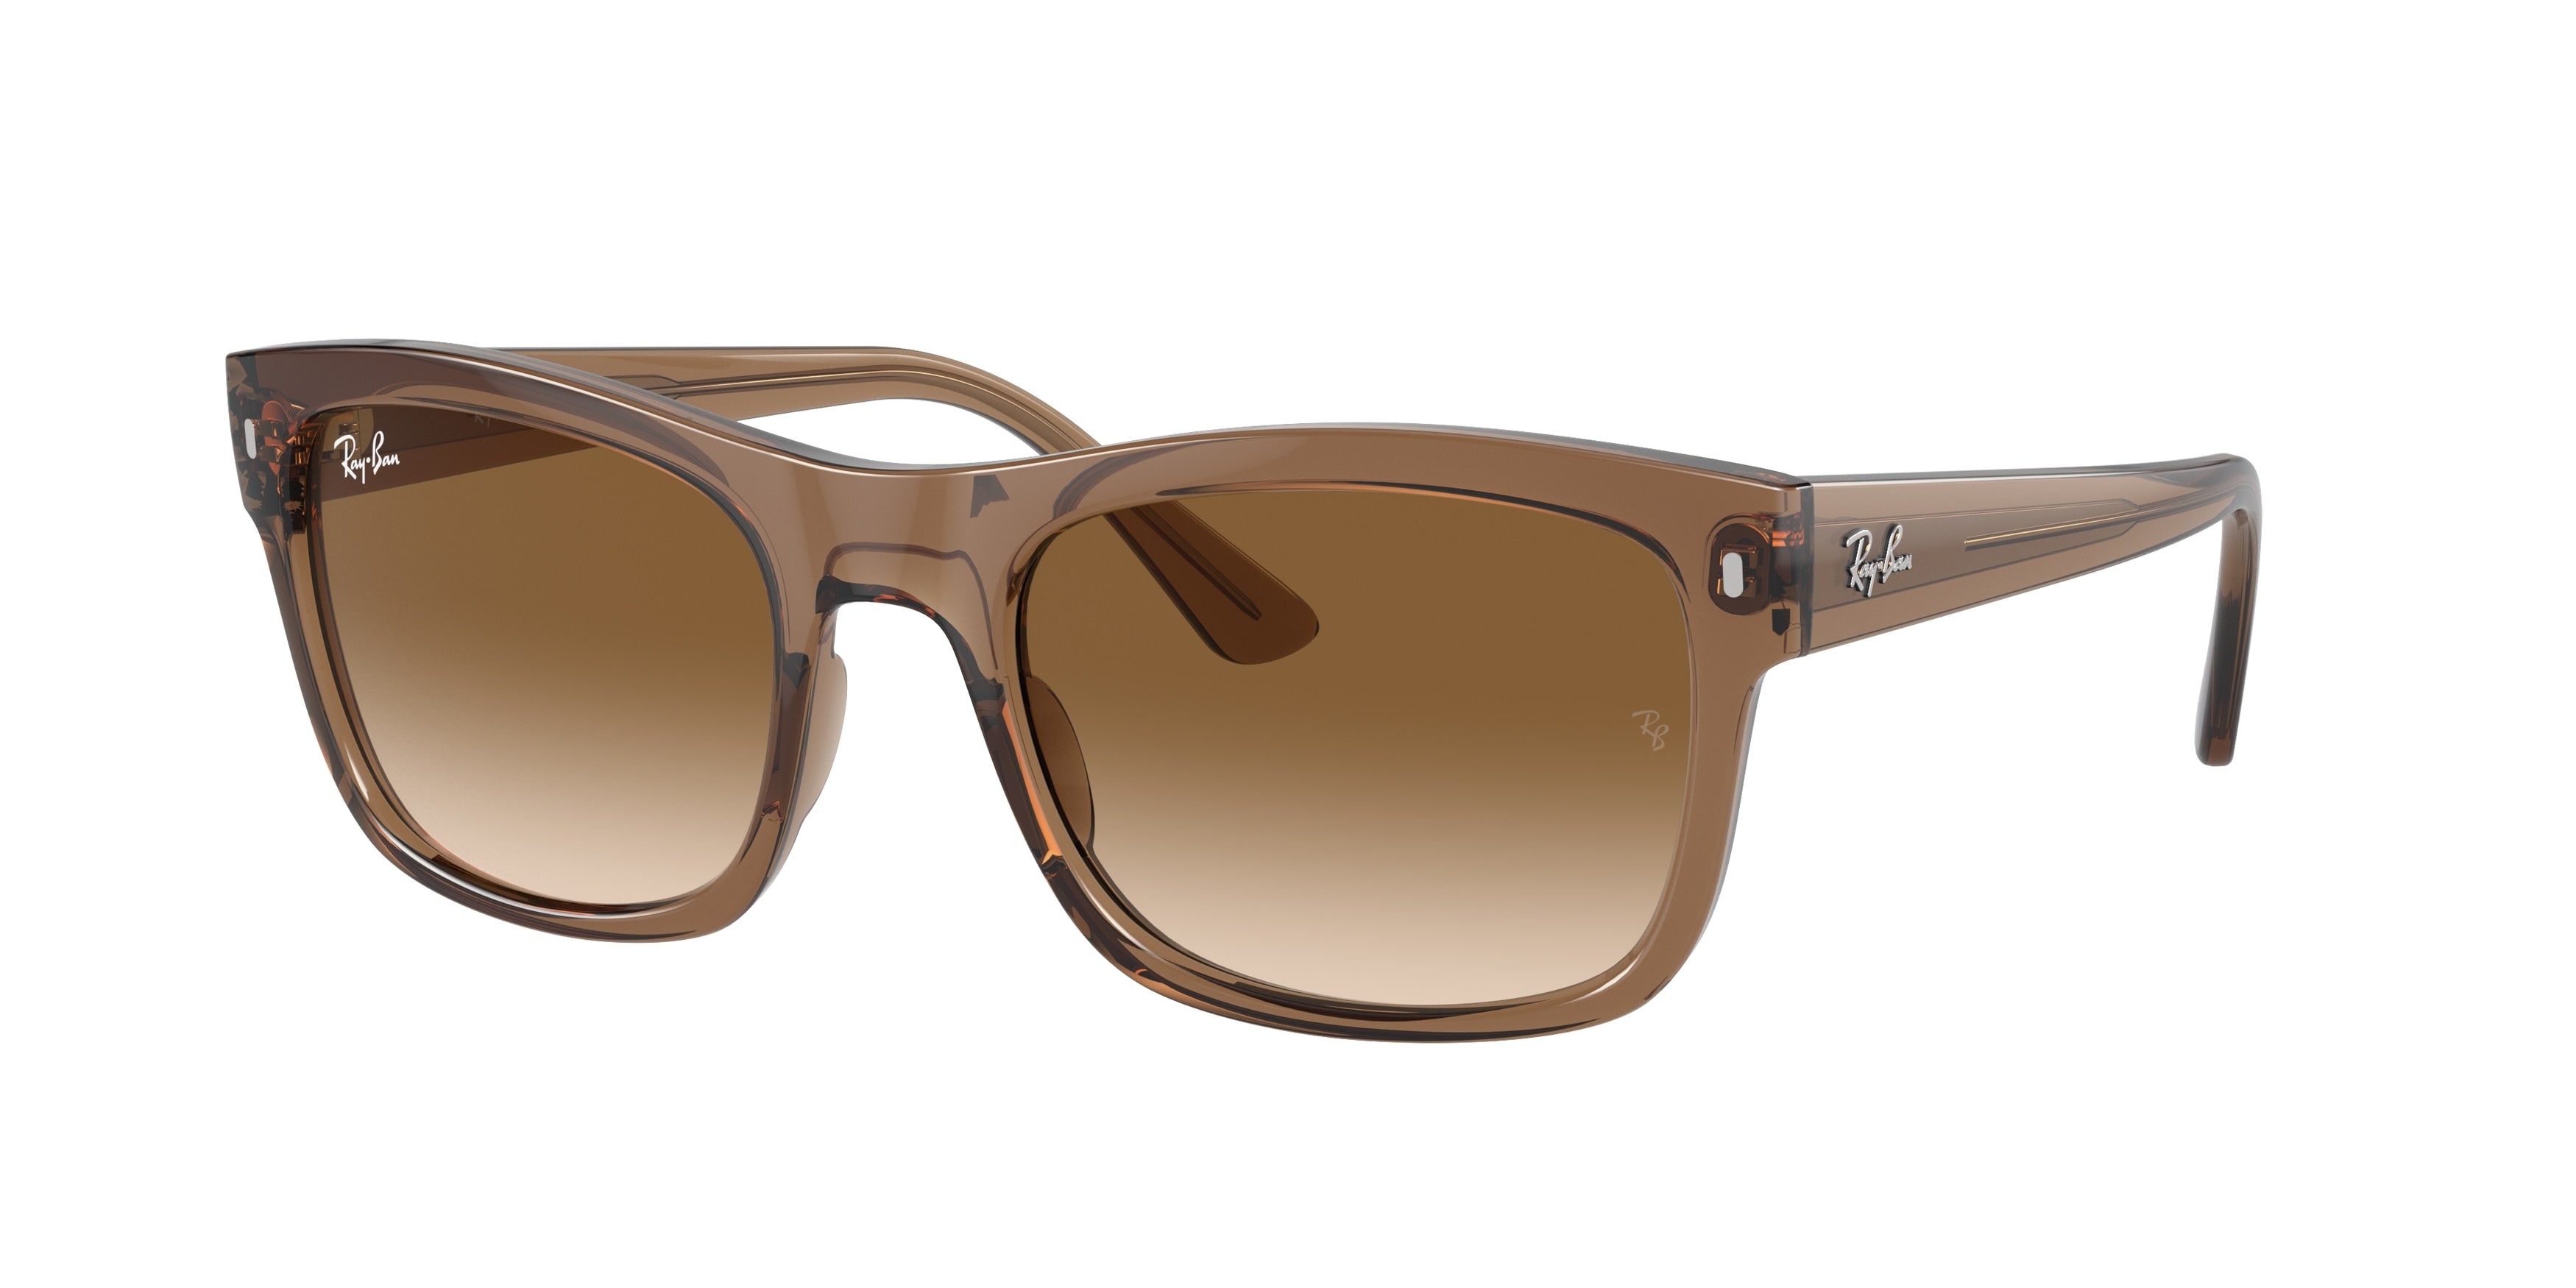 Ray-Ban RB4428F Square Sunglasses  664051-Transparent Light Brown 56-145-21 - Color Map Beige